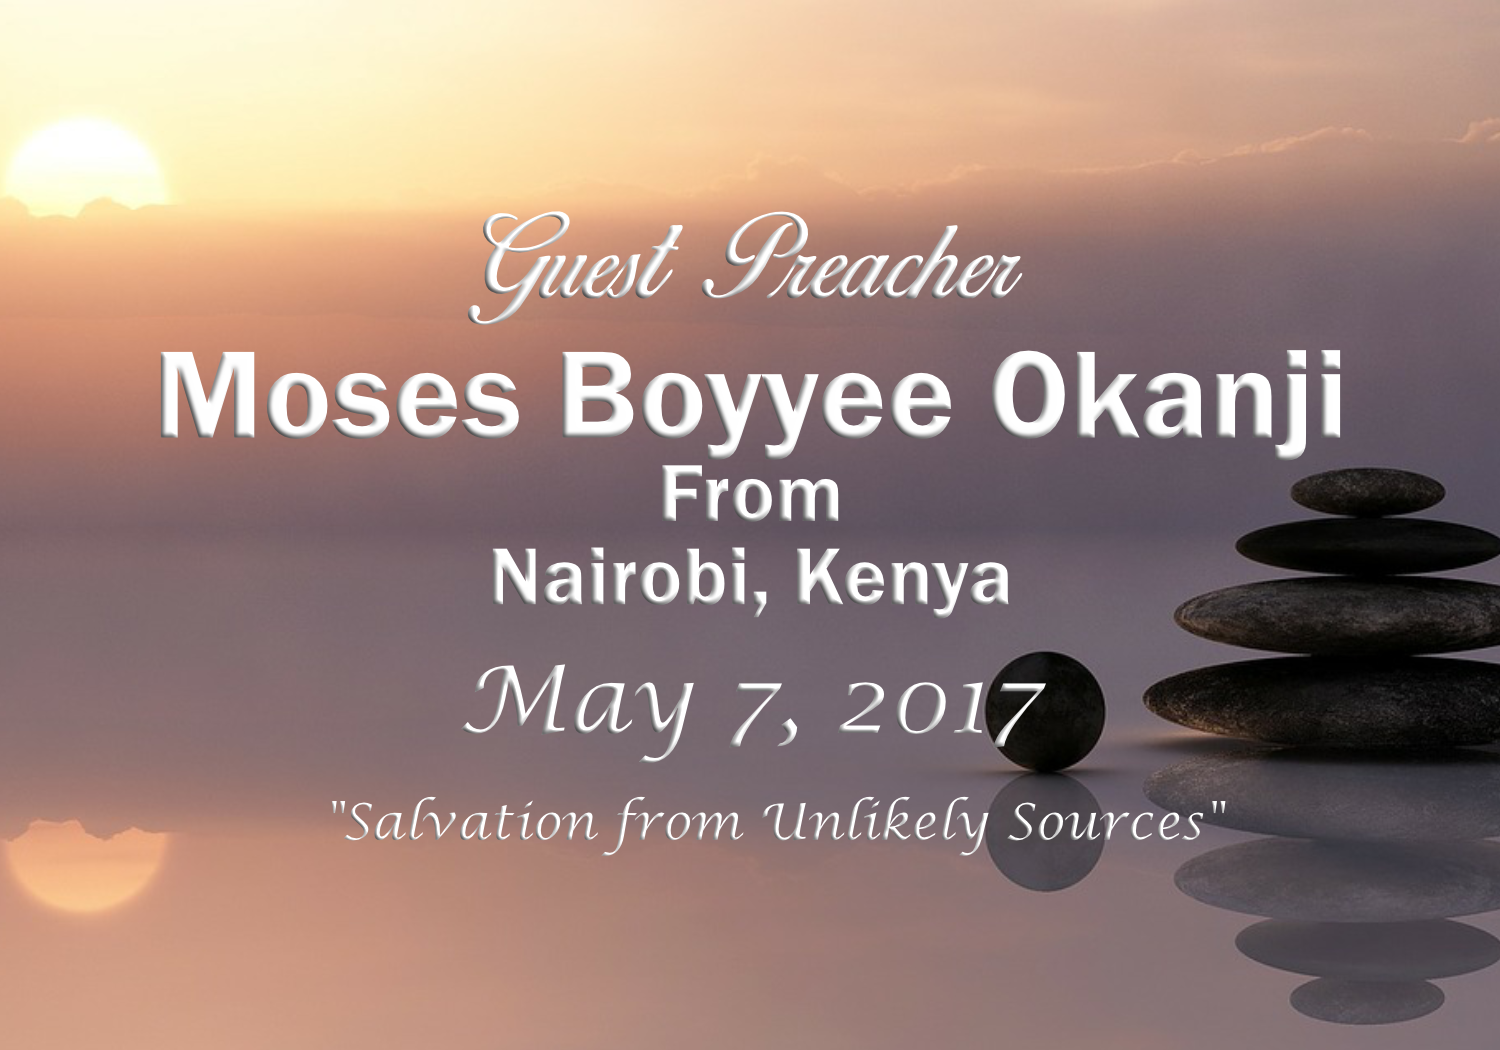 ”Salvation from Unlikely Sources” - Guest Preacher Moses Boyyee Okanji